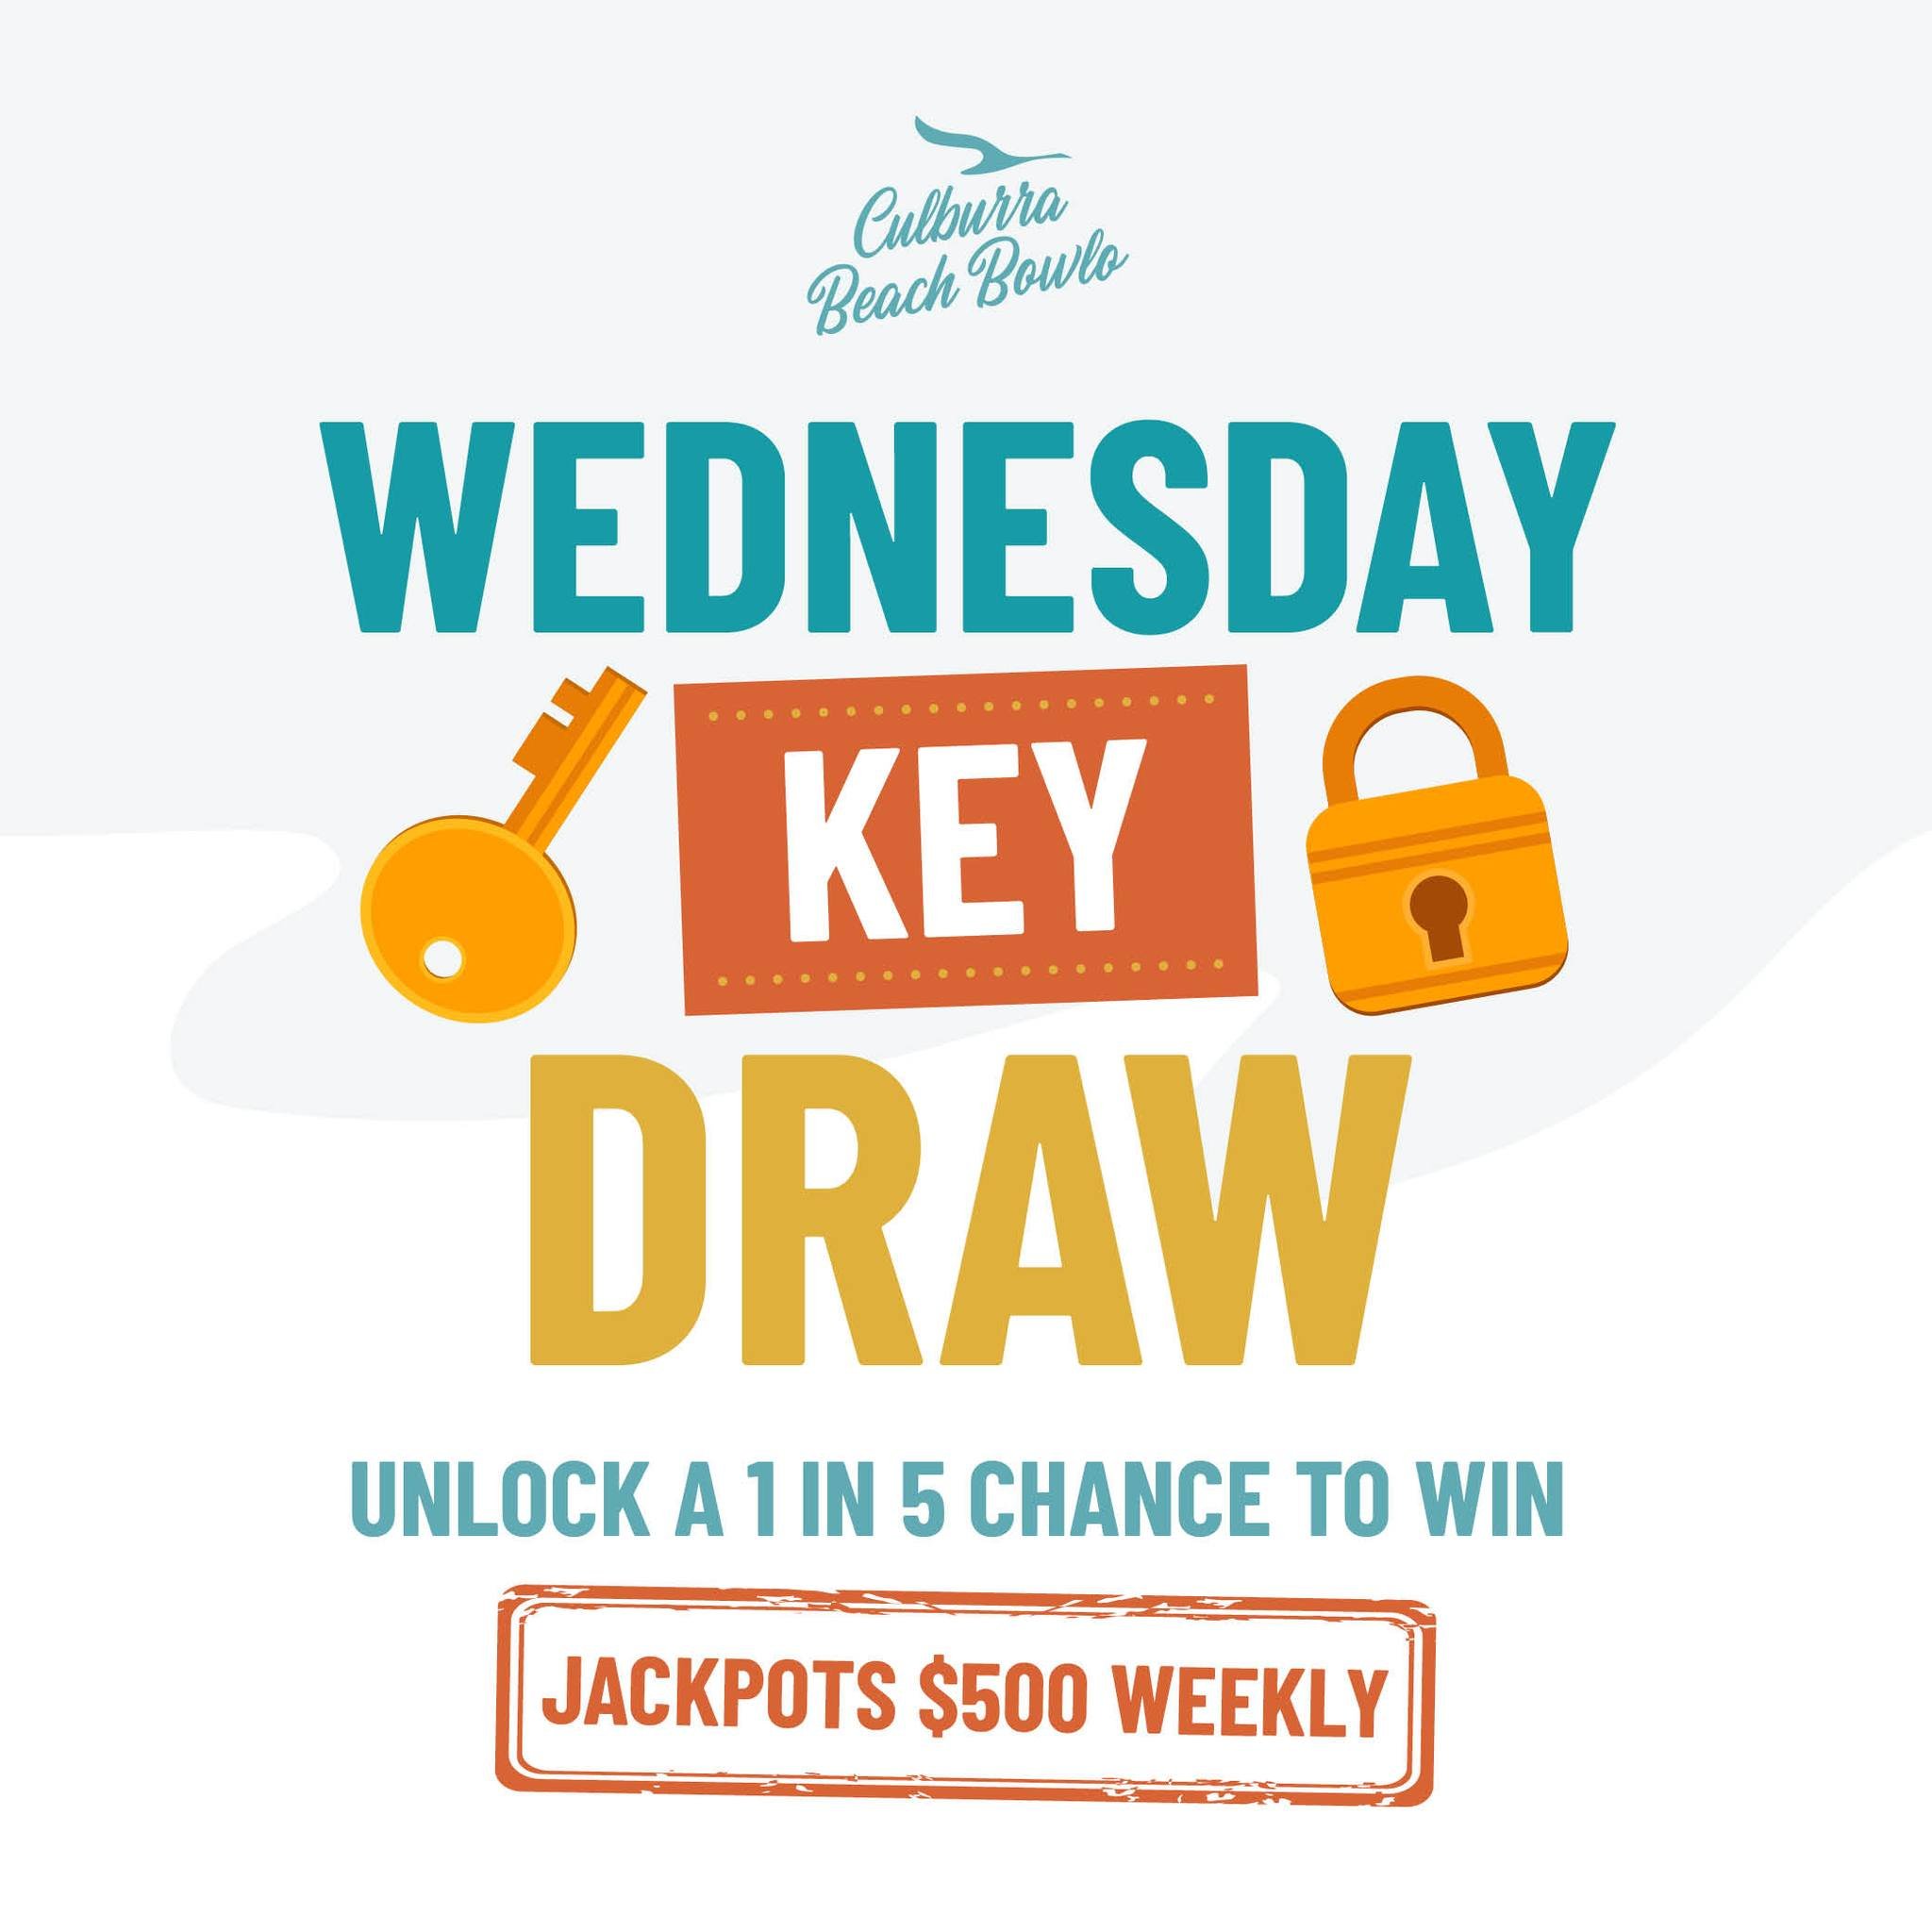 Wednesdays are about to be Winning Days at Culburra Bowling Club! From June 5th, we are introducing our Wednesday Key Draws. 🔑

Spend $5 or more on food, drinks, or raffles and get entered into the draw for a 1 in 5 chance to win! Jackpots $500 week